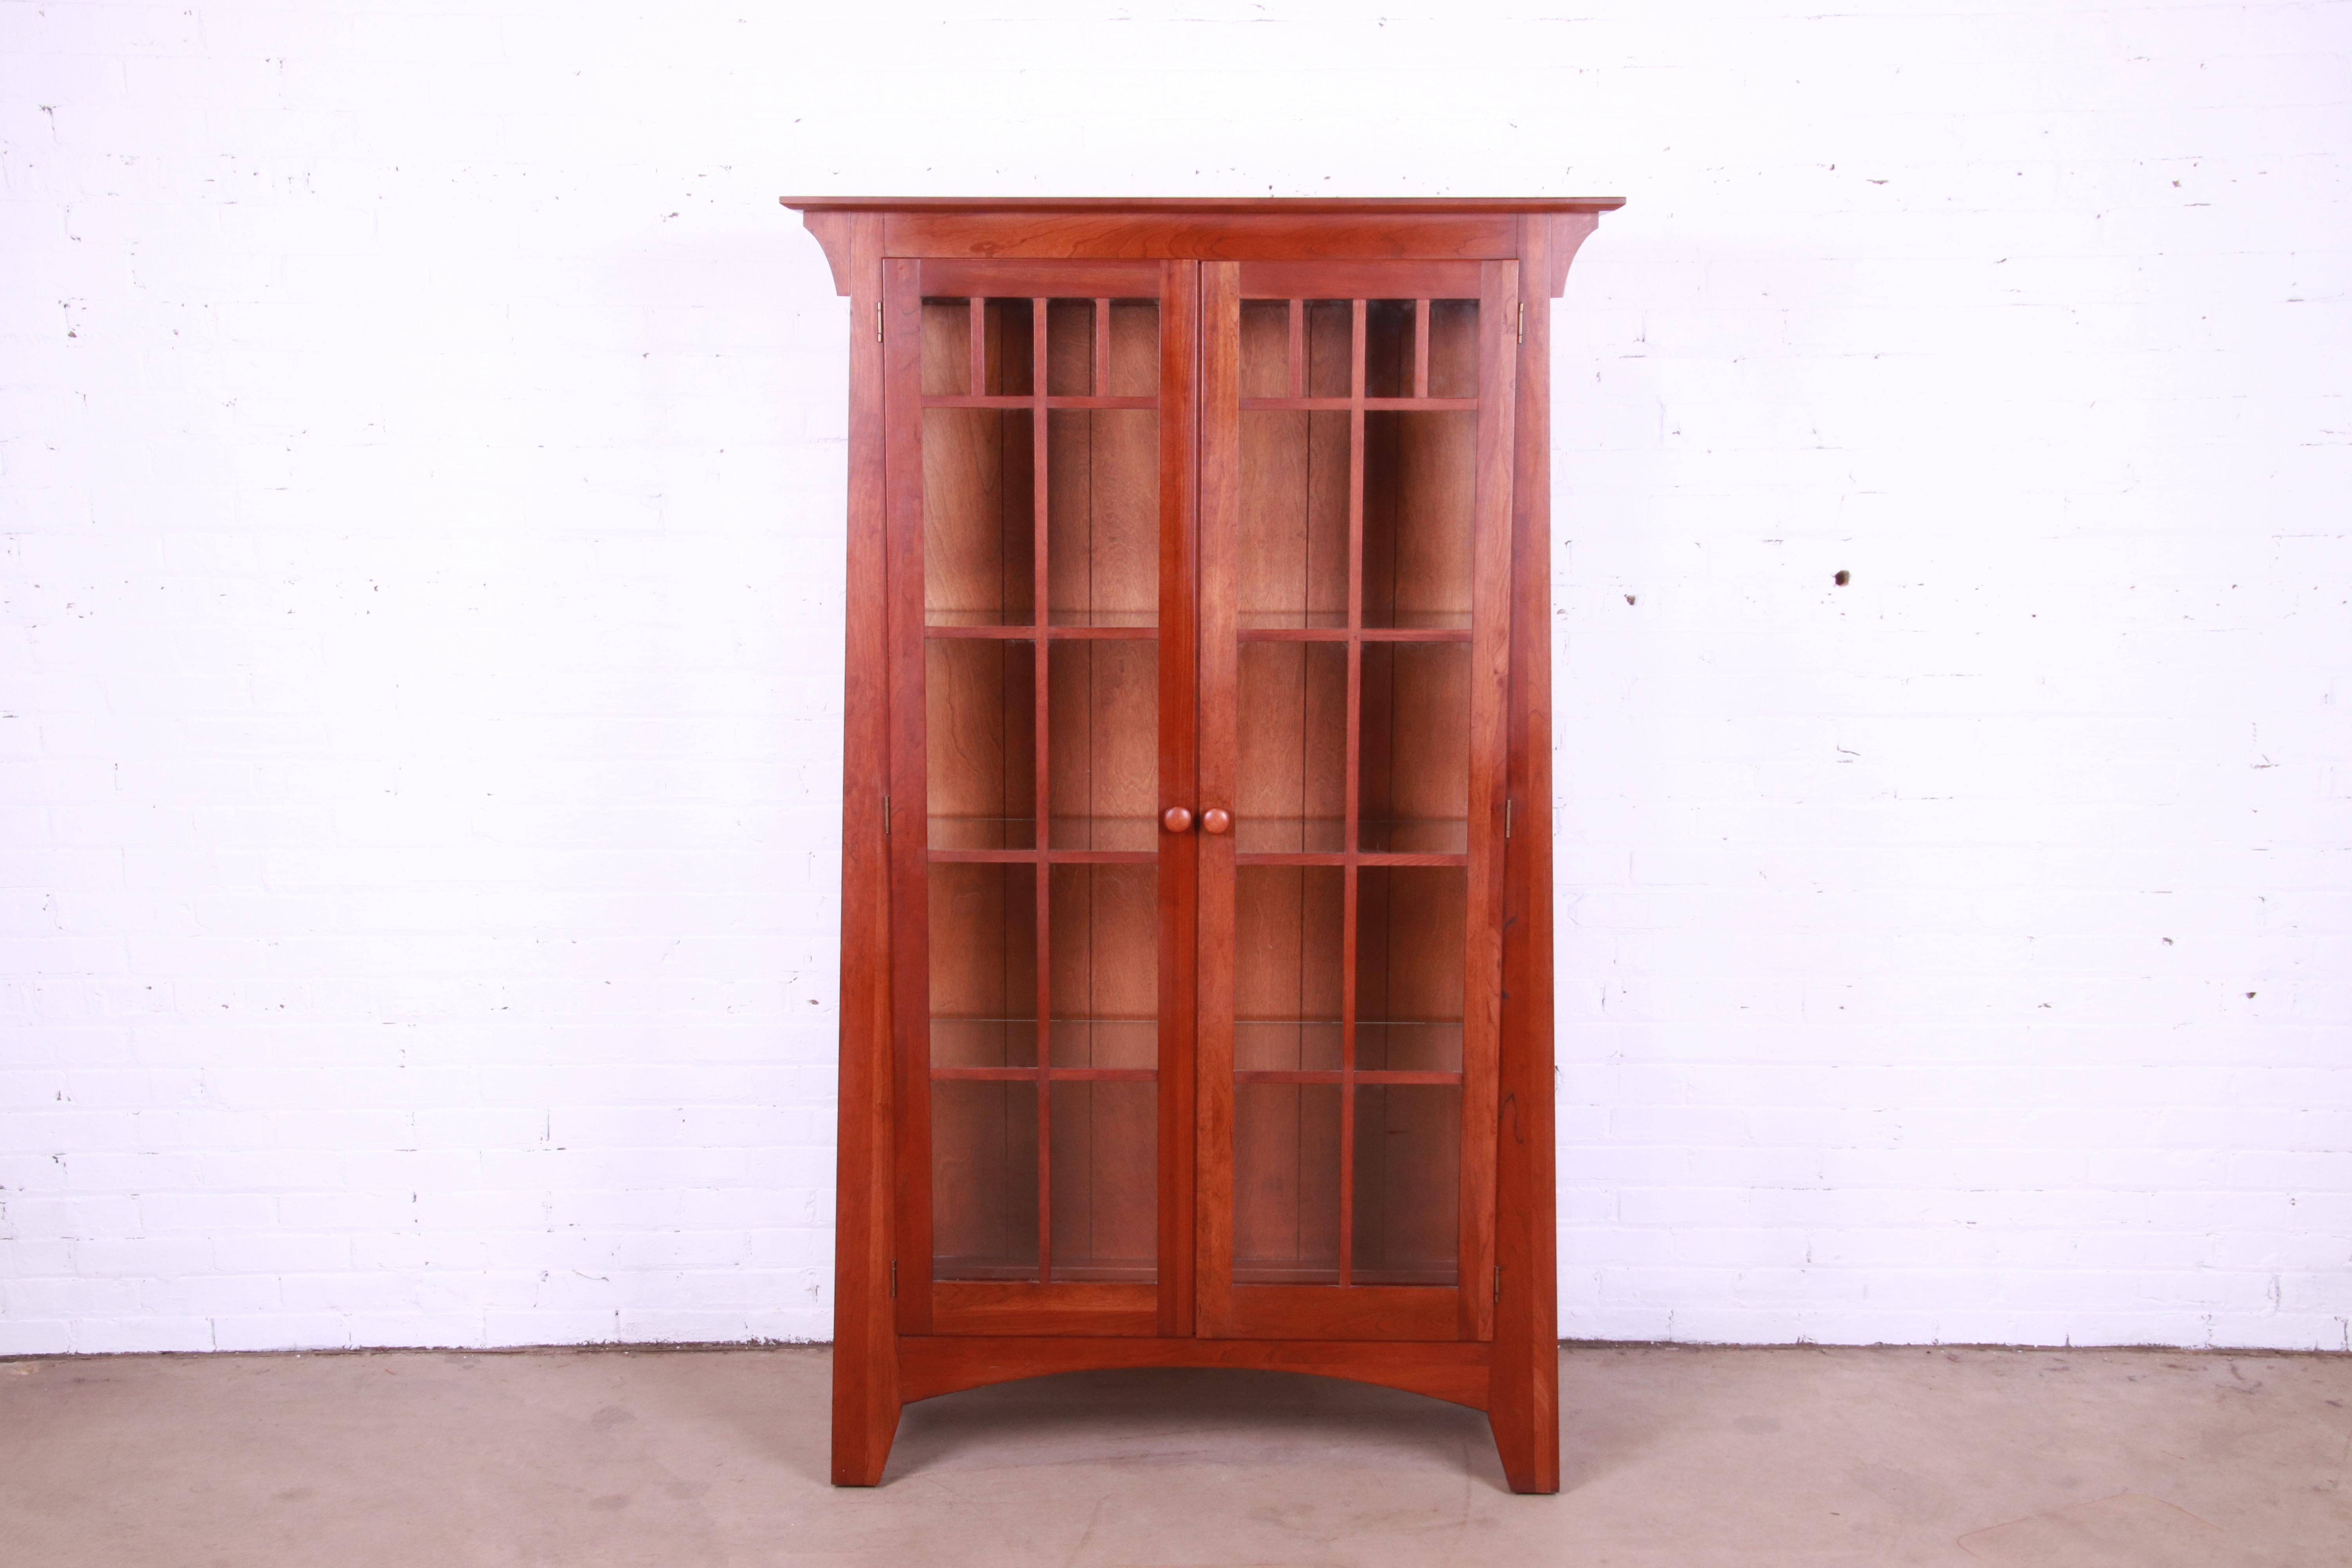 A gorgeous Mission or Arts & Crafts style lighted display cabinet or bookcase

In the manner of Gustav Stickley or Harvey Ellis

By Ethan Allen

USA, Circa 1990s

Solid cherry wood, with mullioned glass front and sides.

Measures: 43